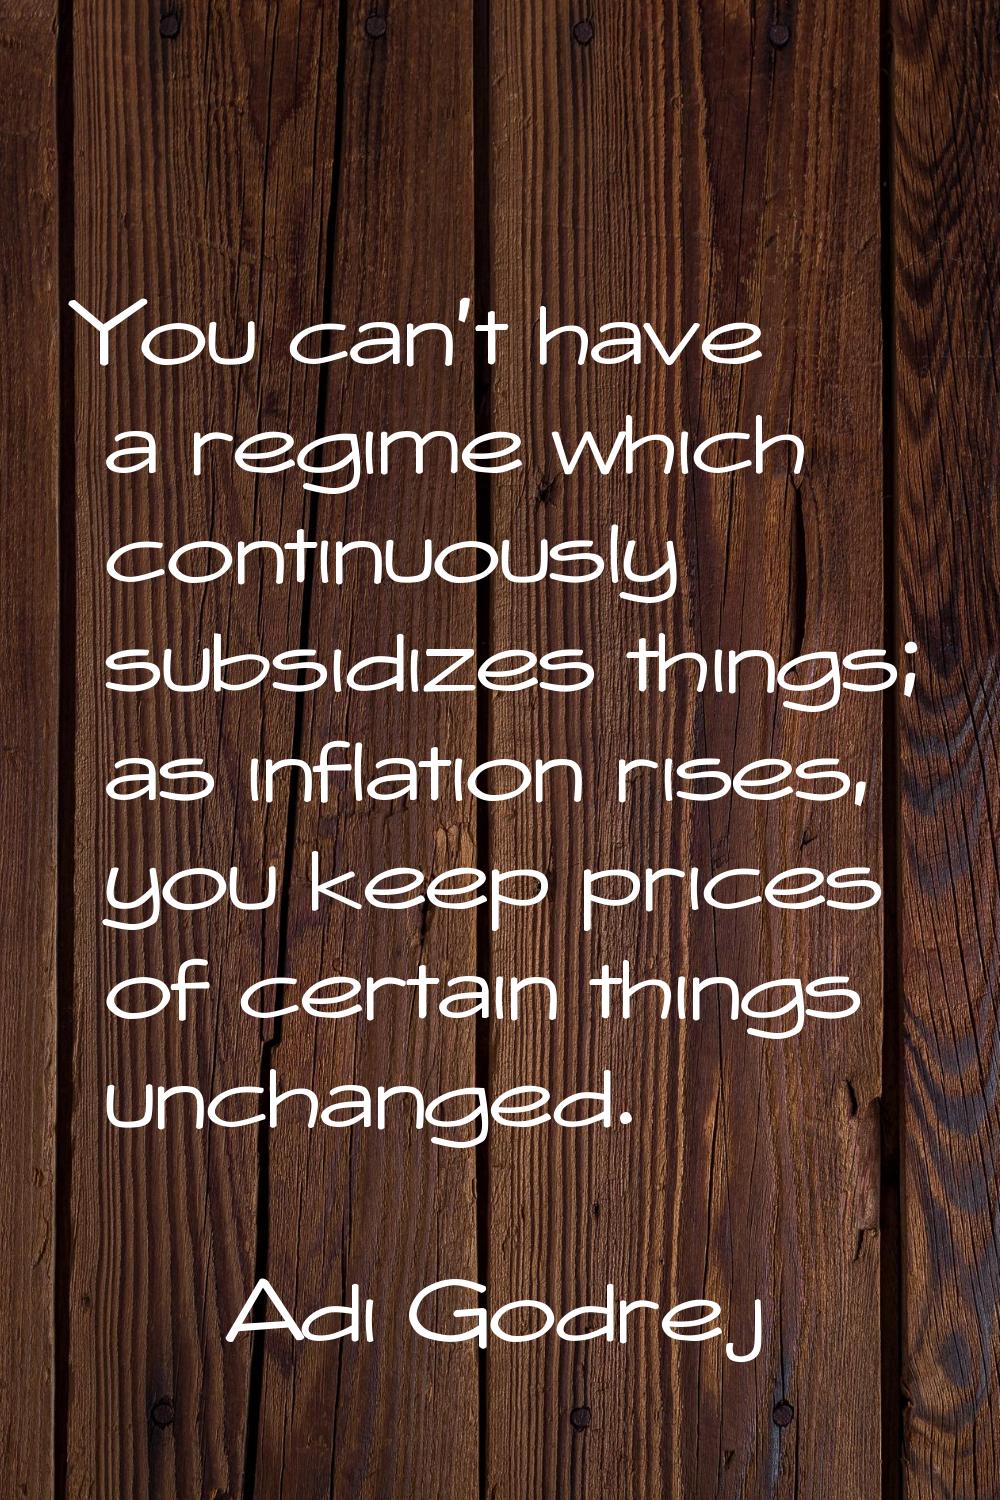 You can't have a regime which continuously subsidizes things; as inflation rises, you keep prices o